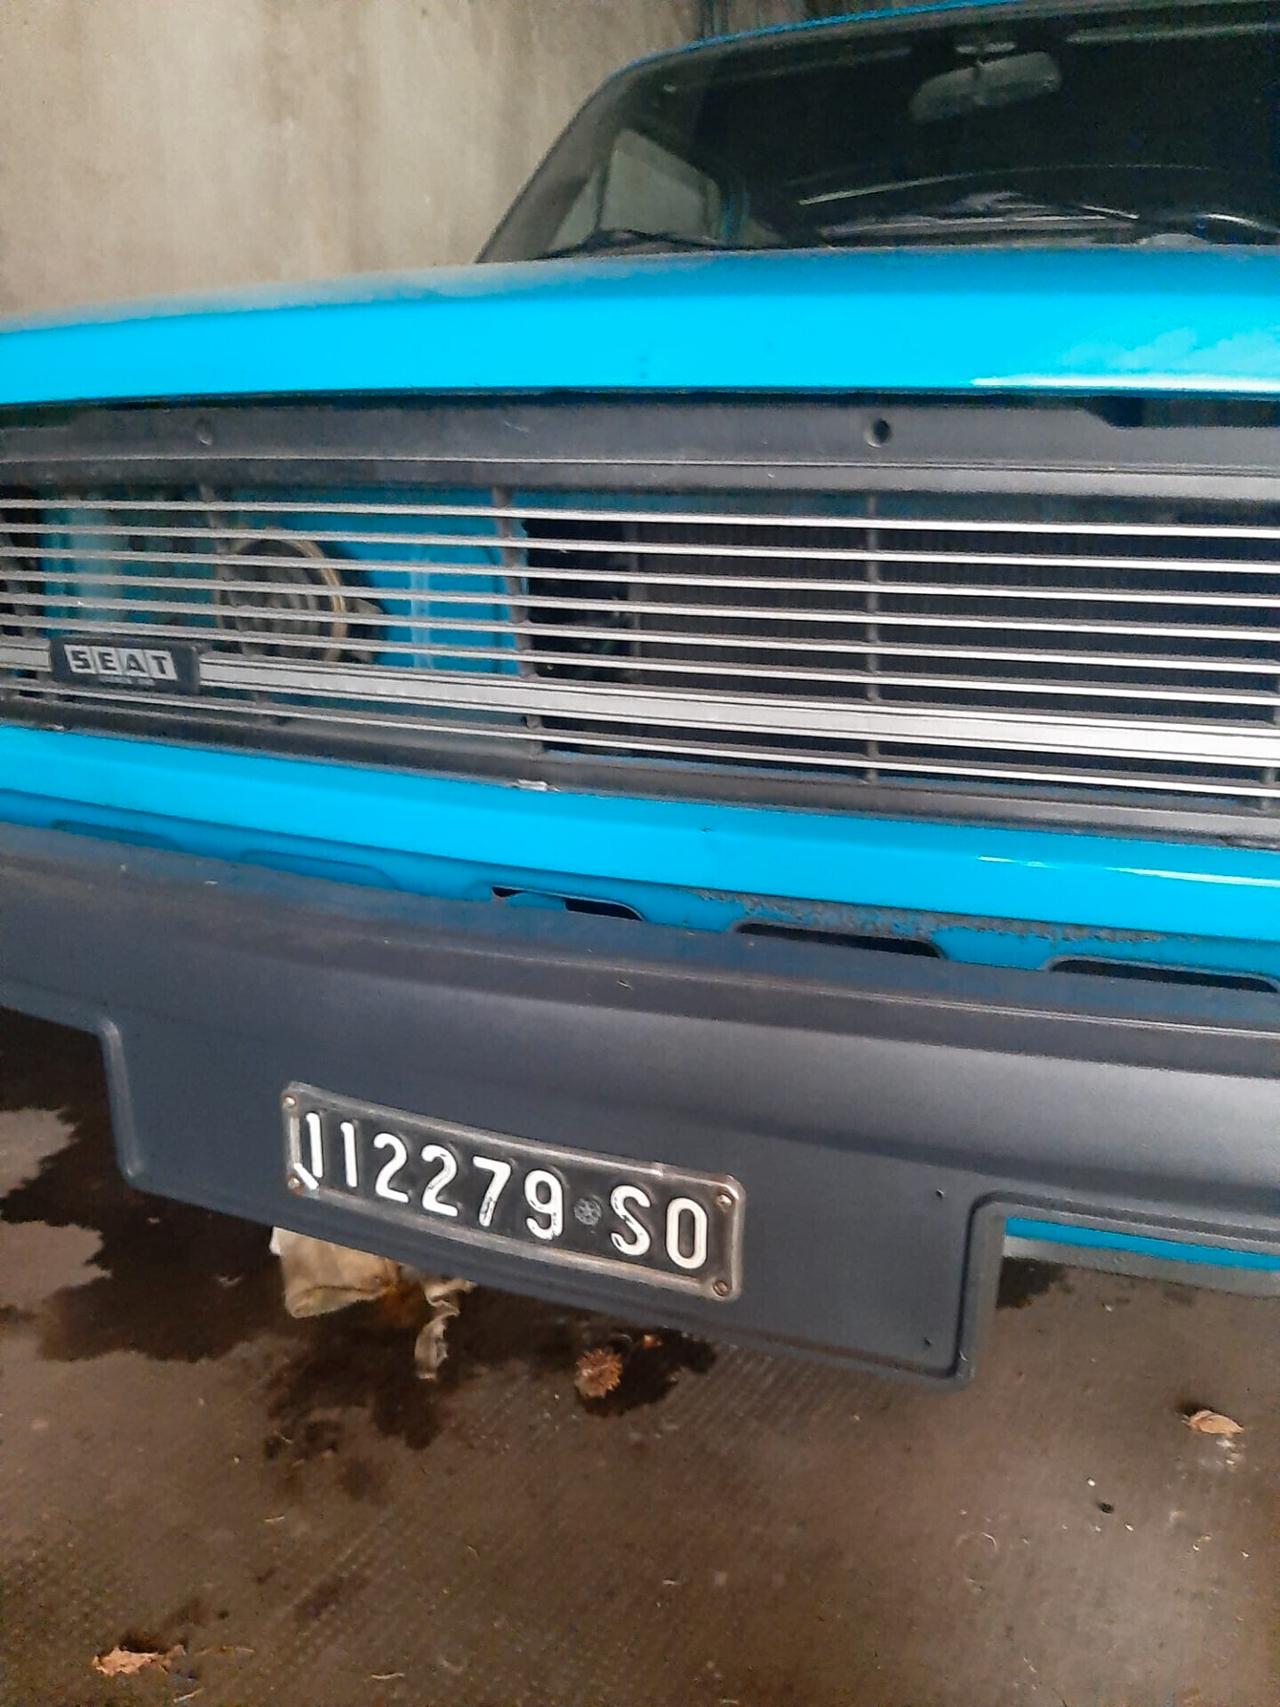 Seat 127 900 CL 1980